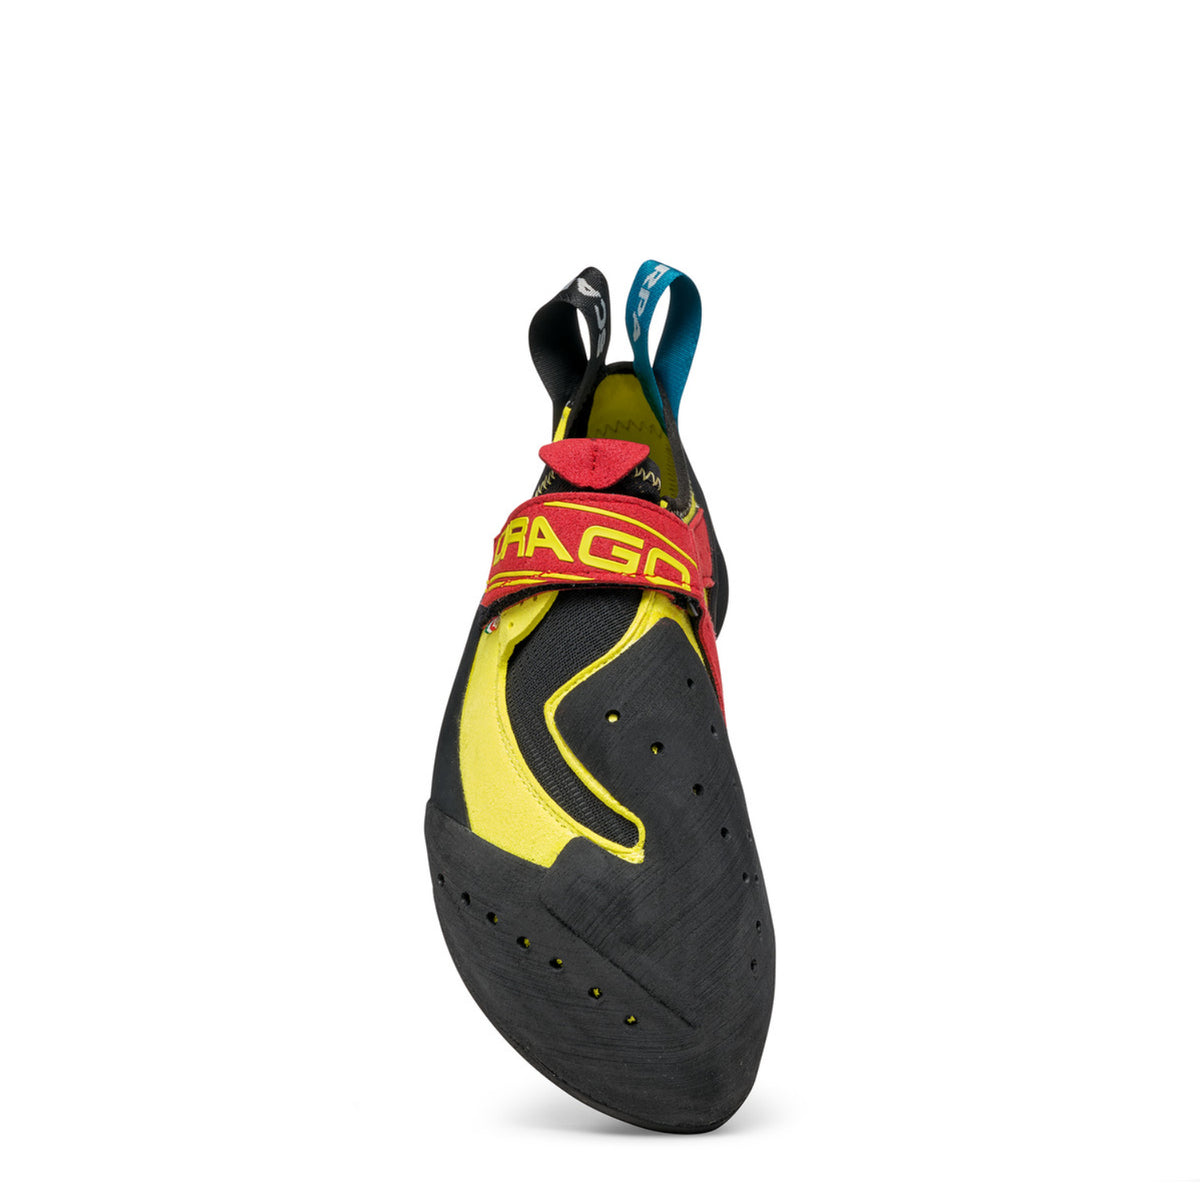 Scarpa Drago climbing shoe, in black and yellow colours showing toe rand